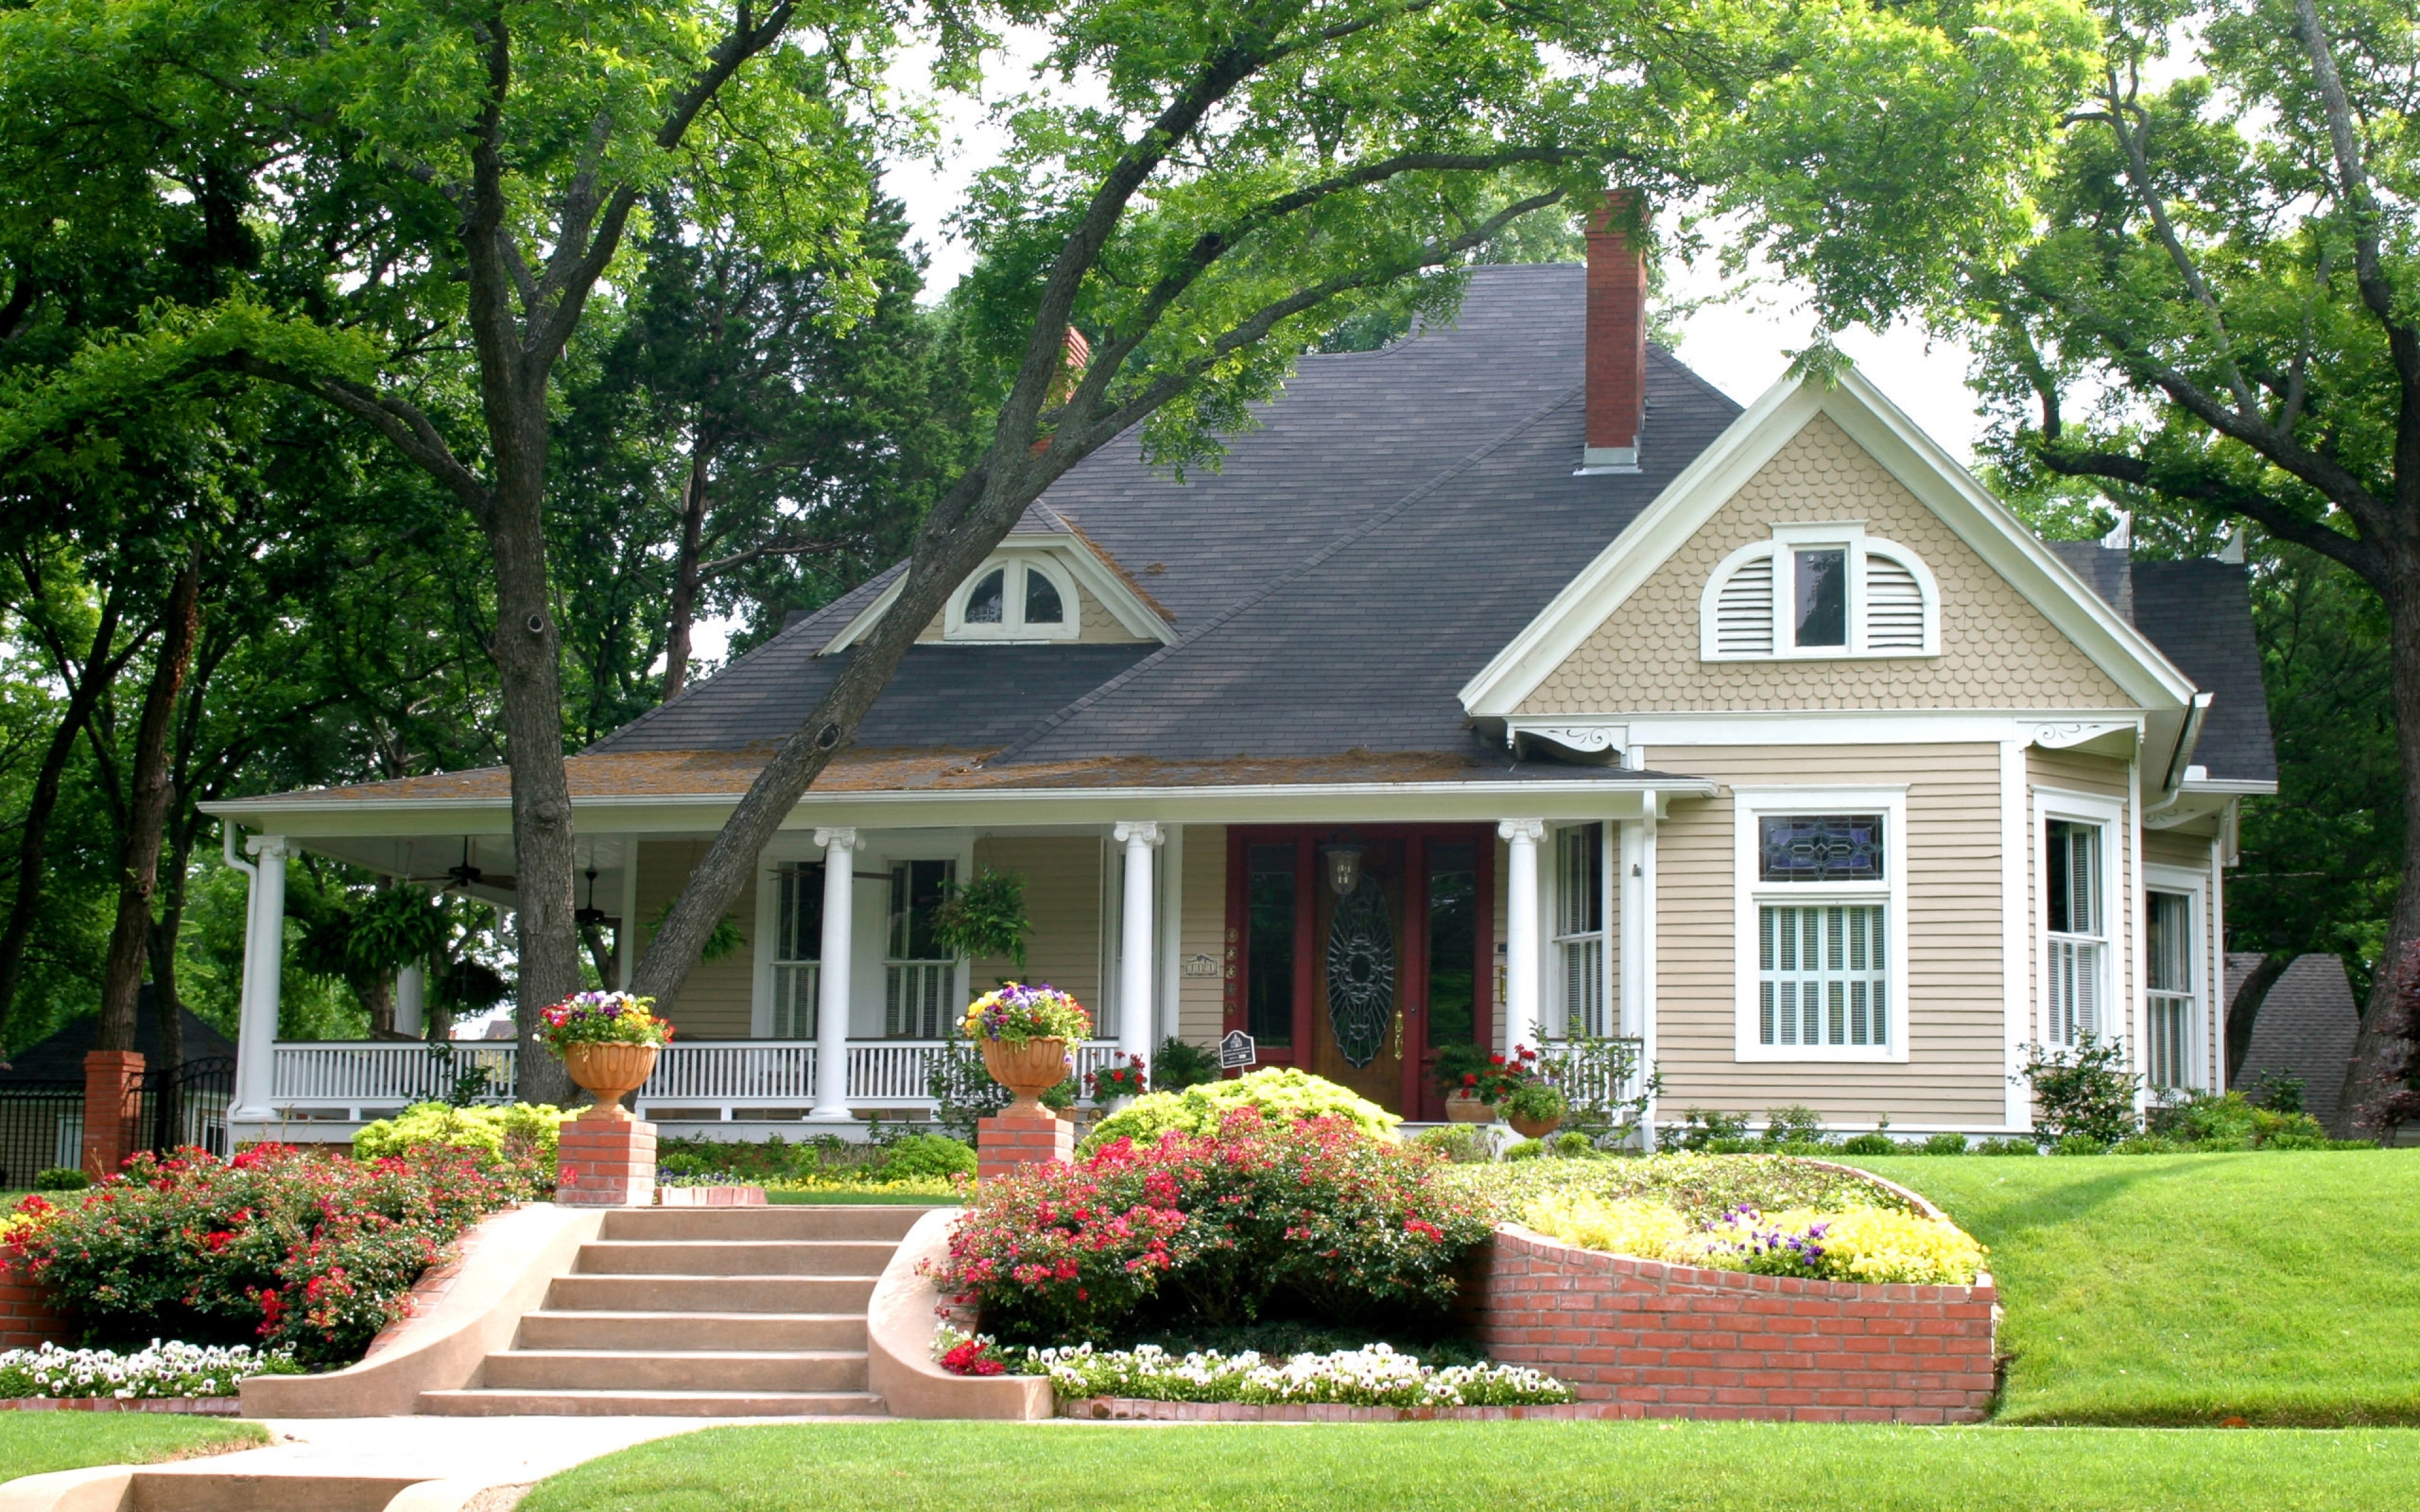 Increase the Value of Your Home with High Value Landscaping